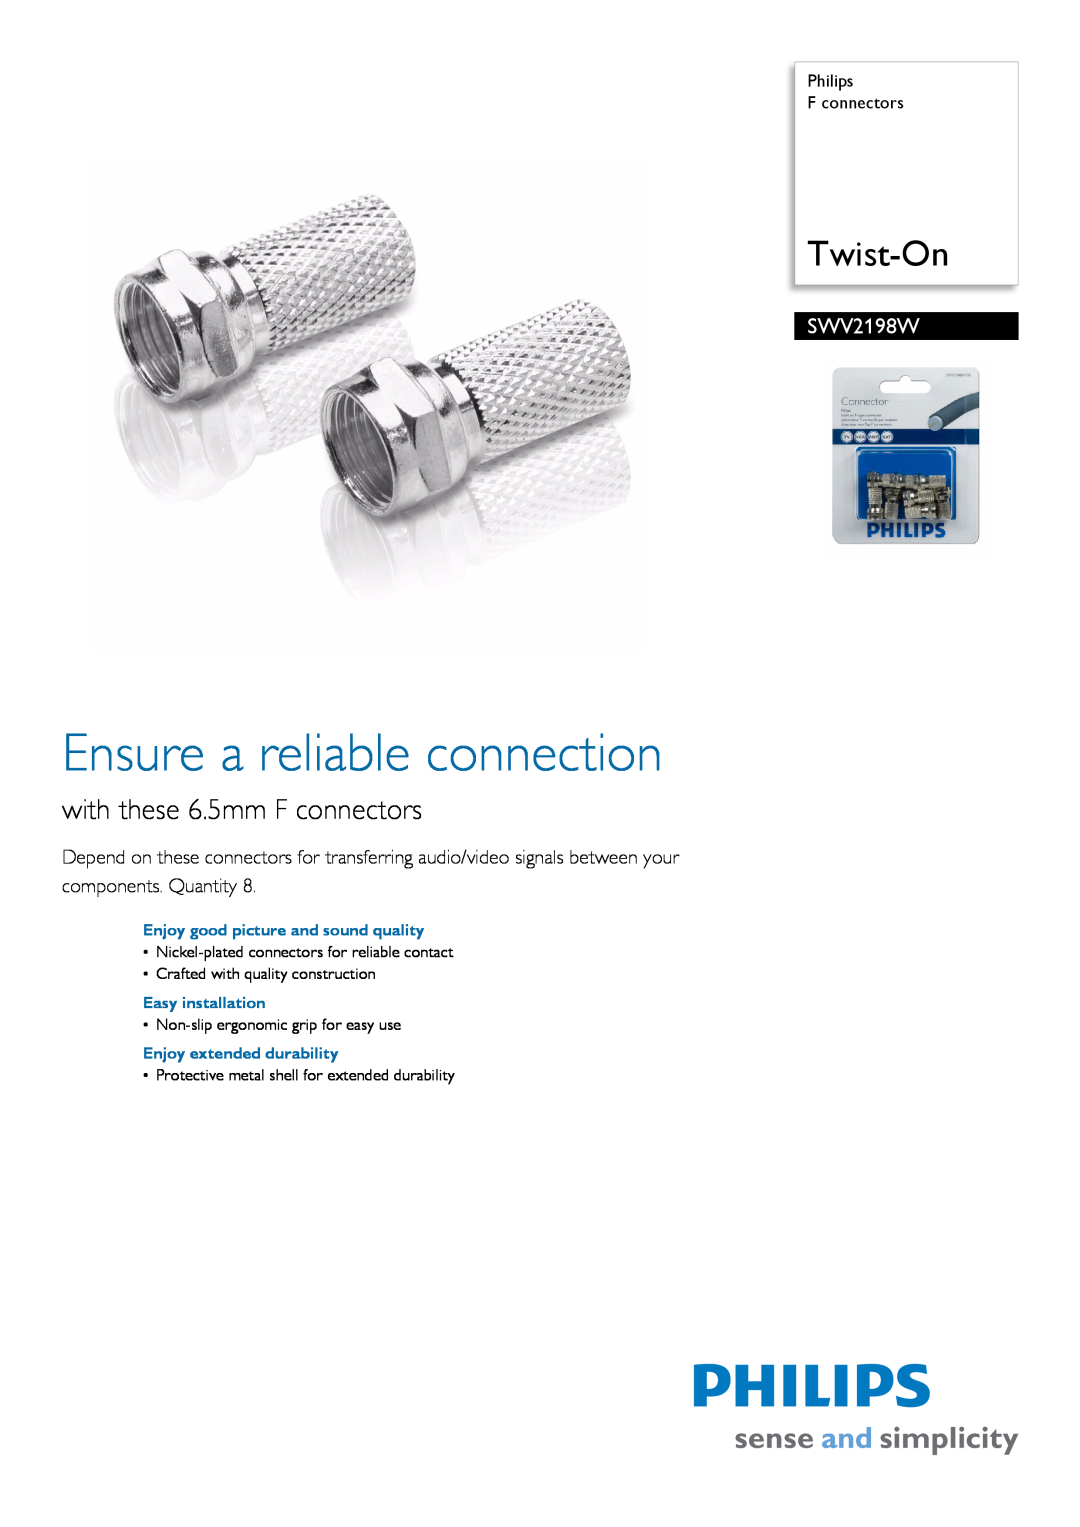 Philips SWV2198W manual Philips F connectors, Enjoy good picture and sound quality, Easy installation, Twist-On 